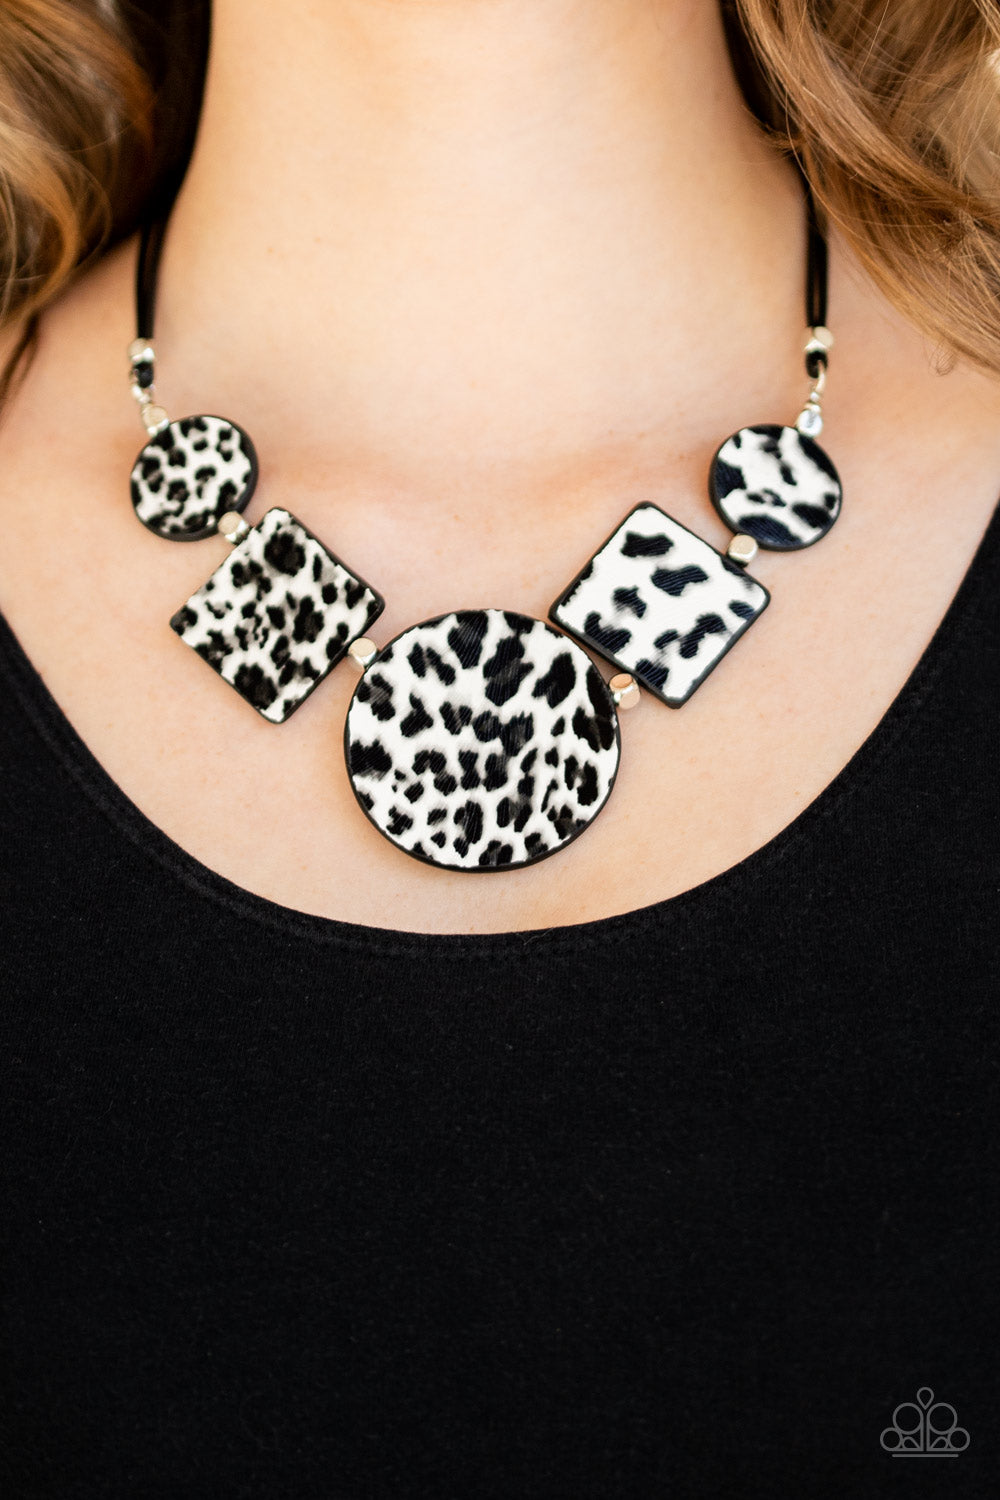 Paparazzi Necklace ~ Here Kitty Kitty - White and Gray Cheetah Print Necklace